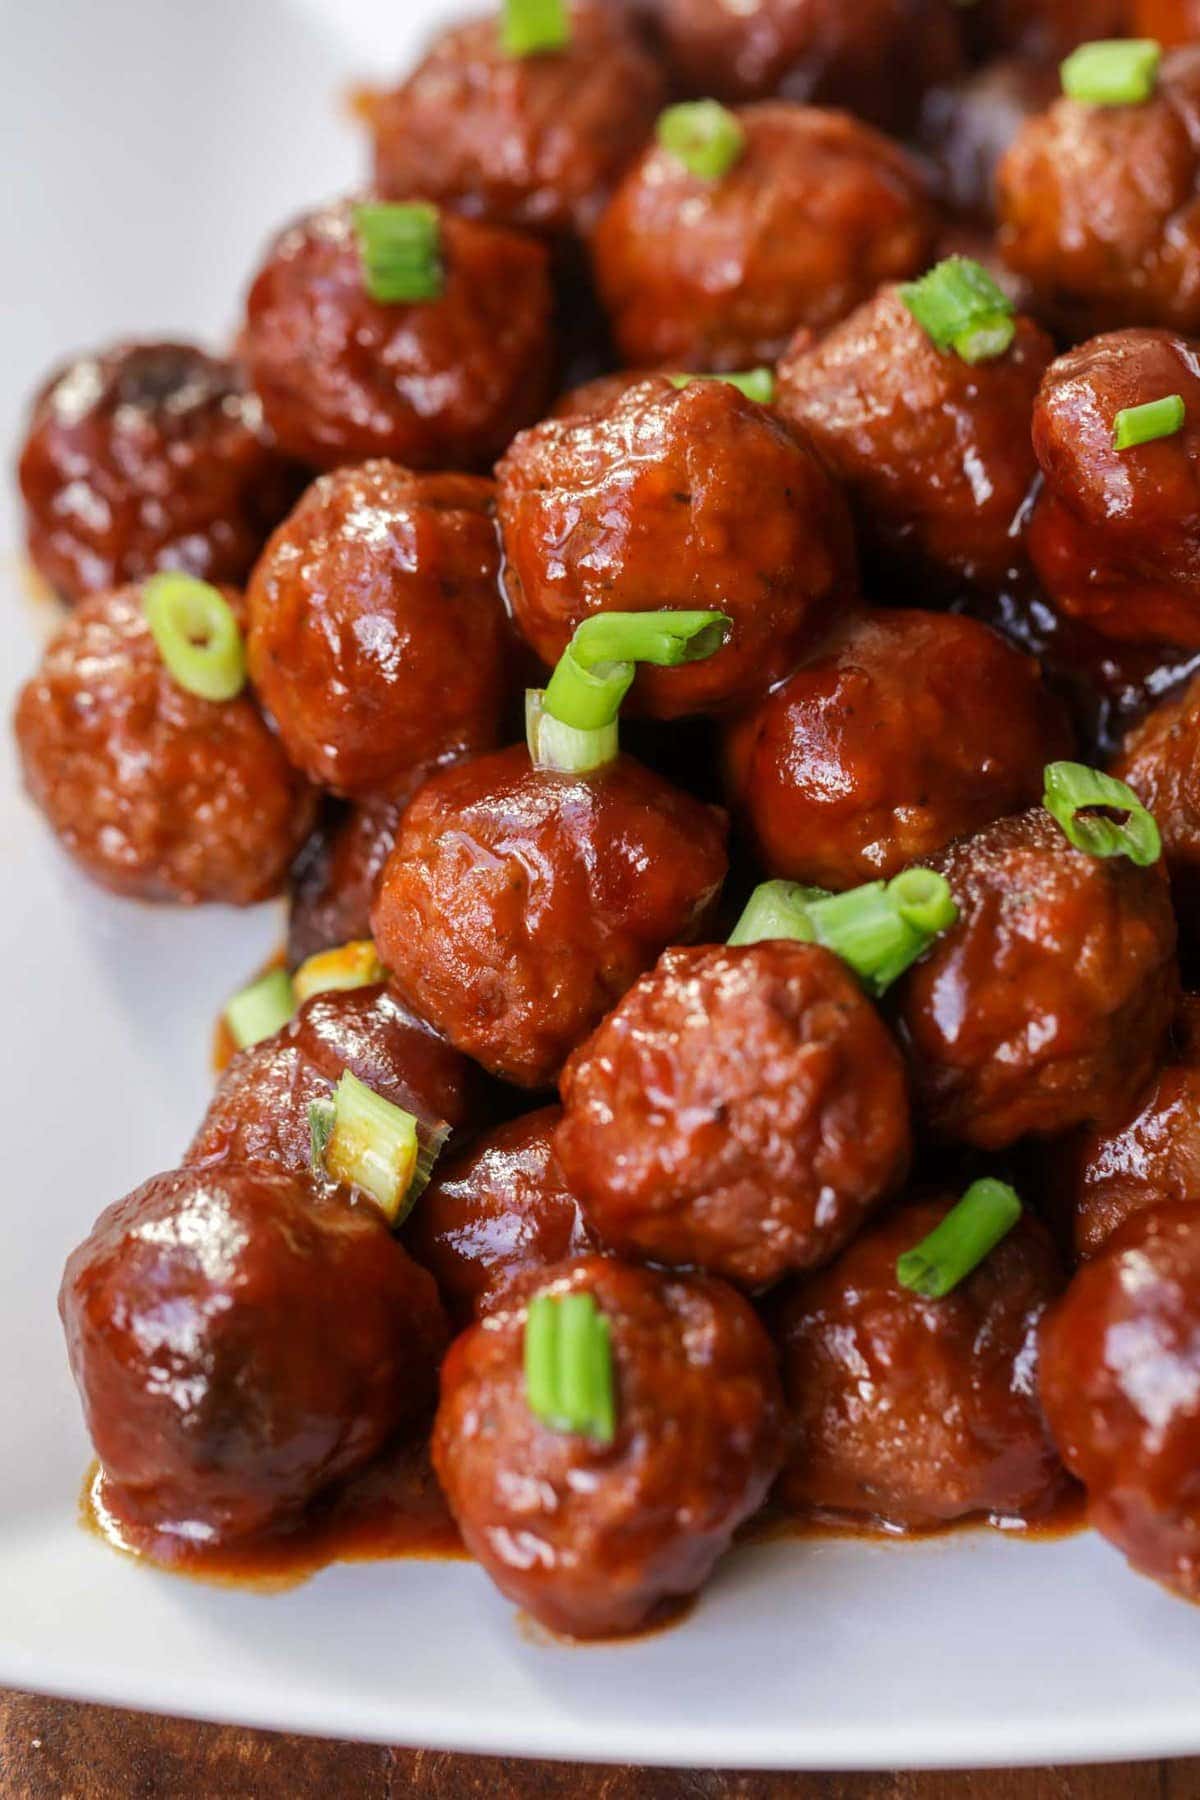 Grape Jelly Meatball Recipe served on a white plate.